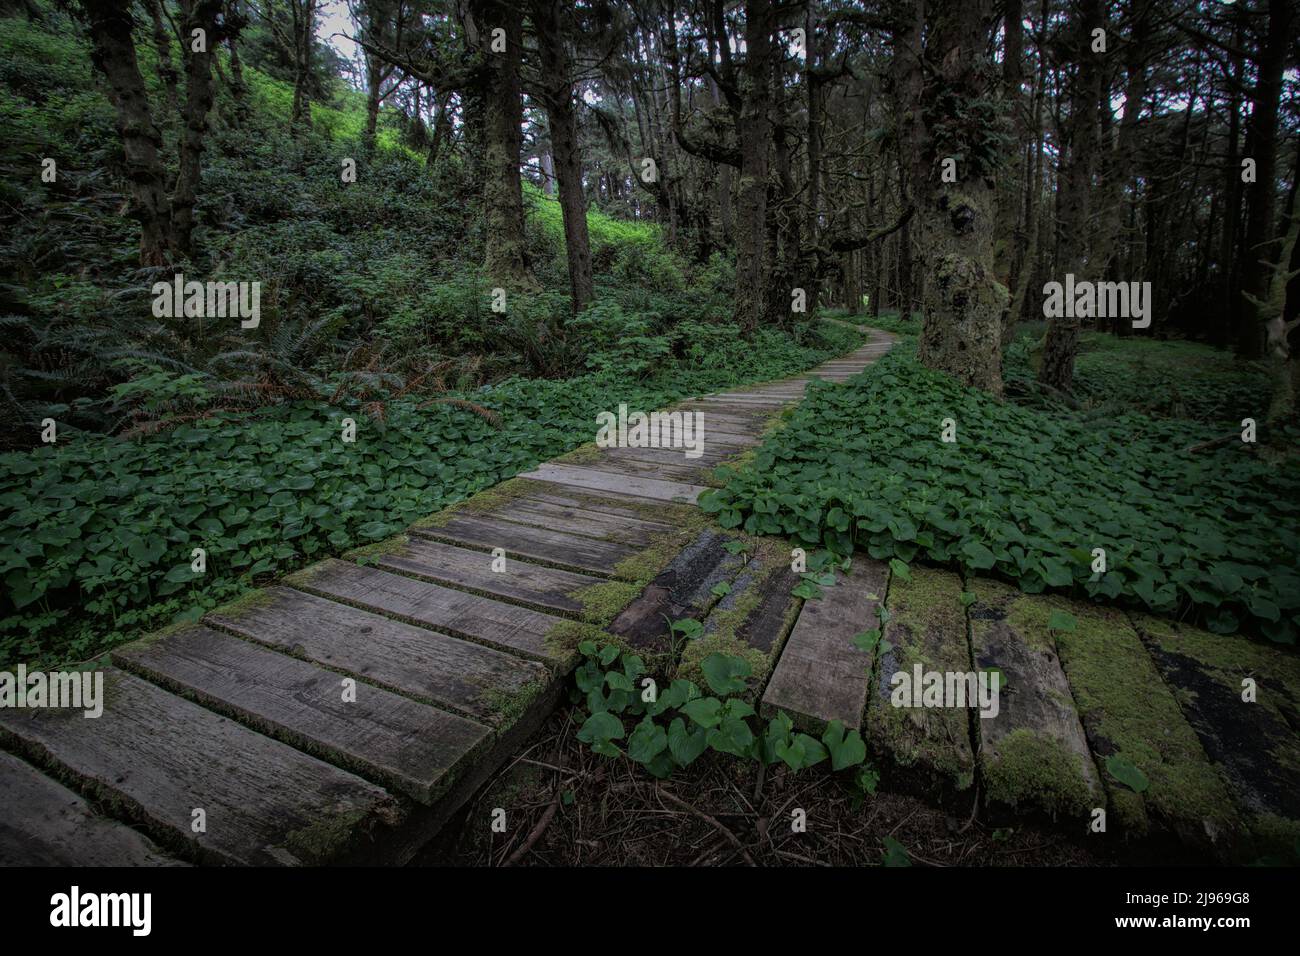 Boardwalks at Long Beach in Pacific Rim National Park in British Columbia, Canada Stock Photo